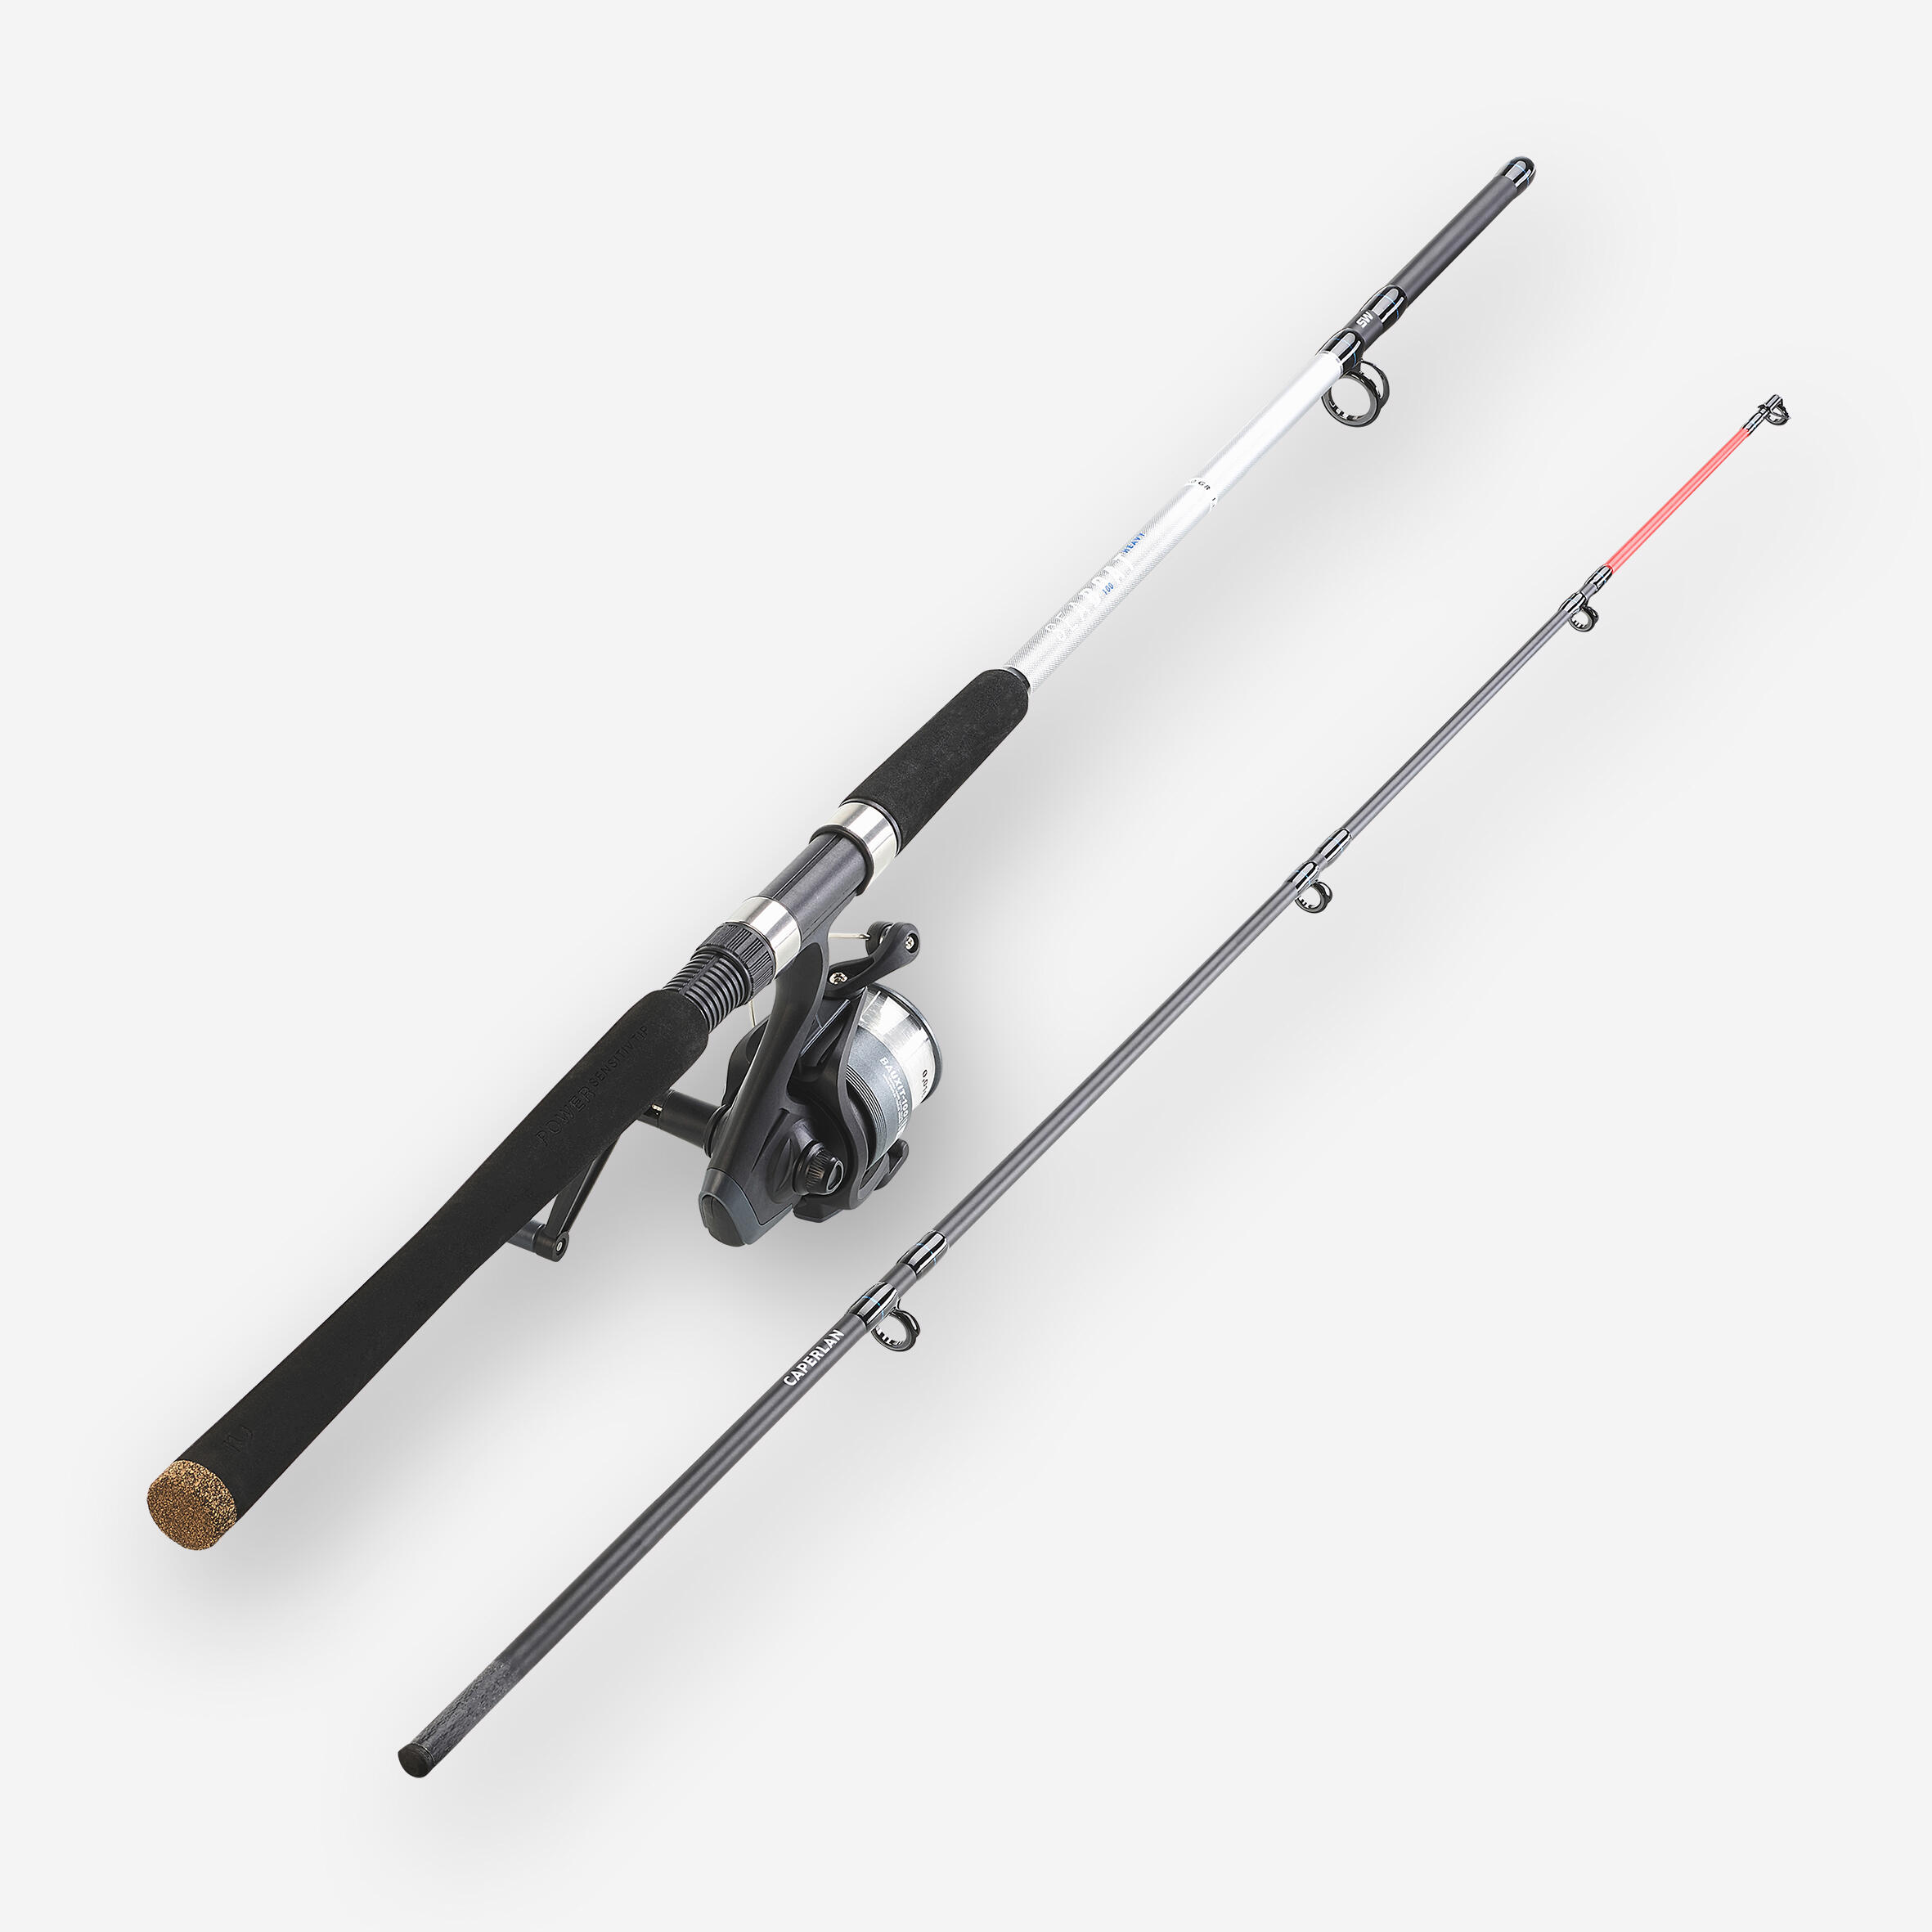 Sea Fishing Rods and reels